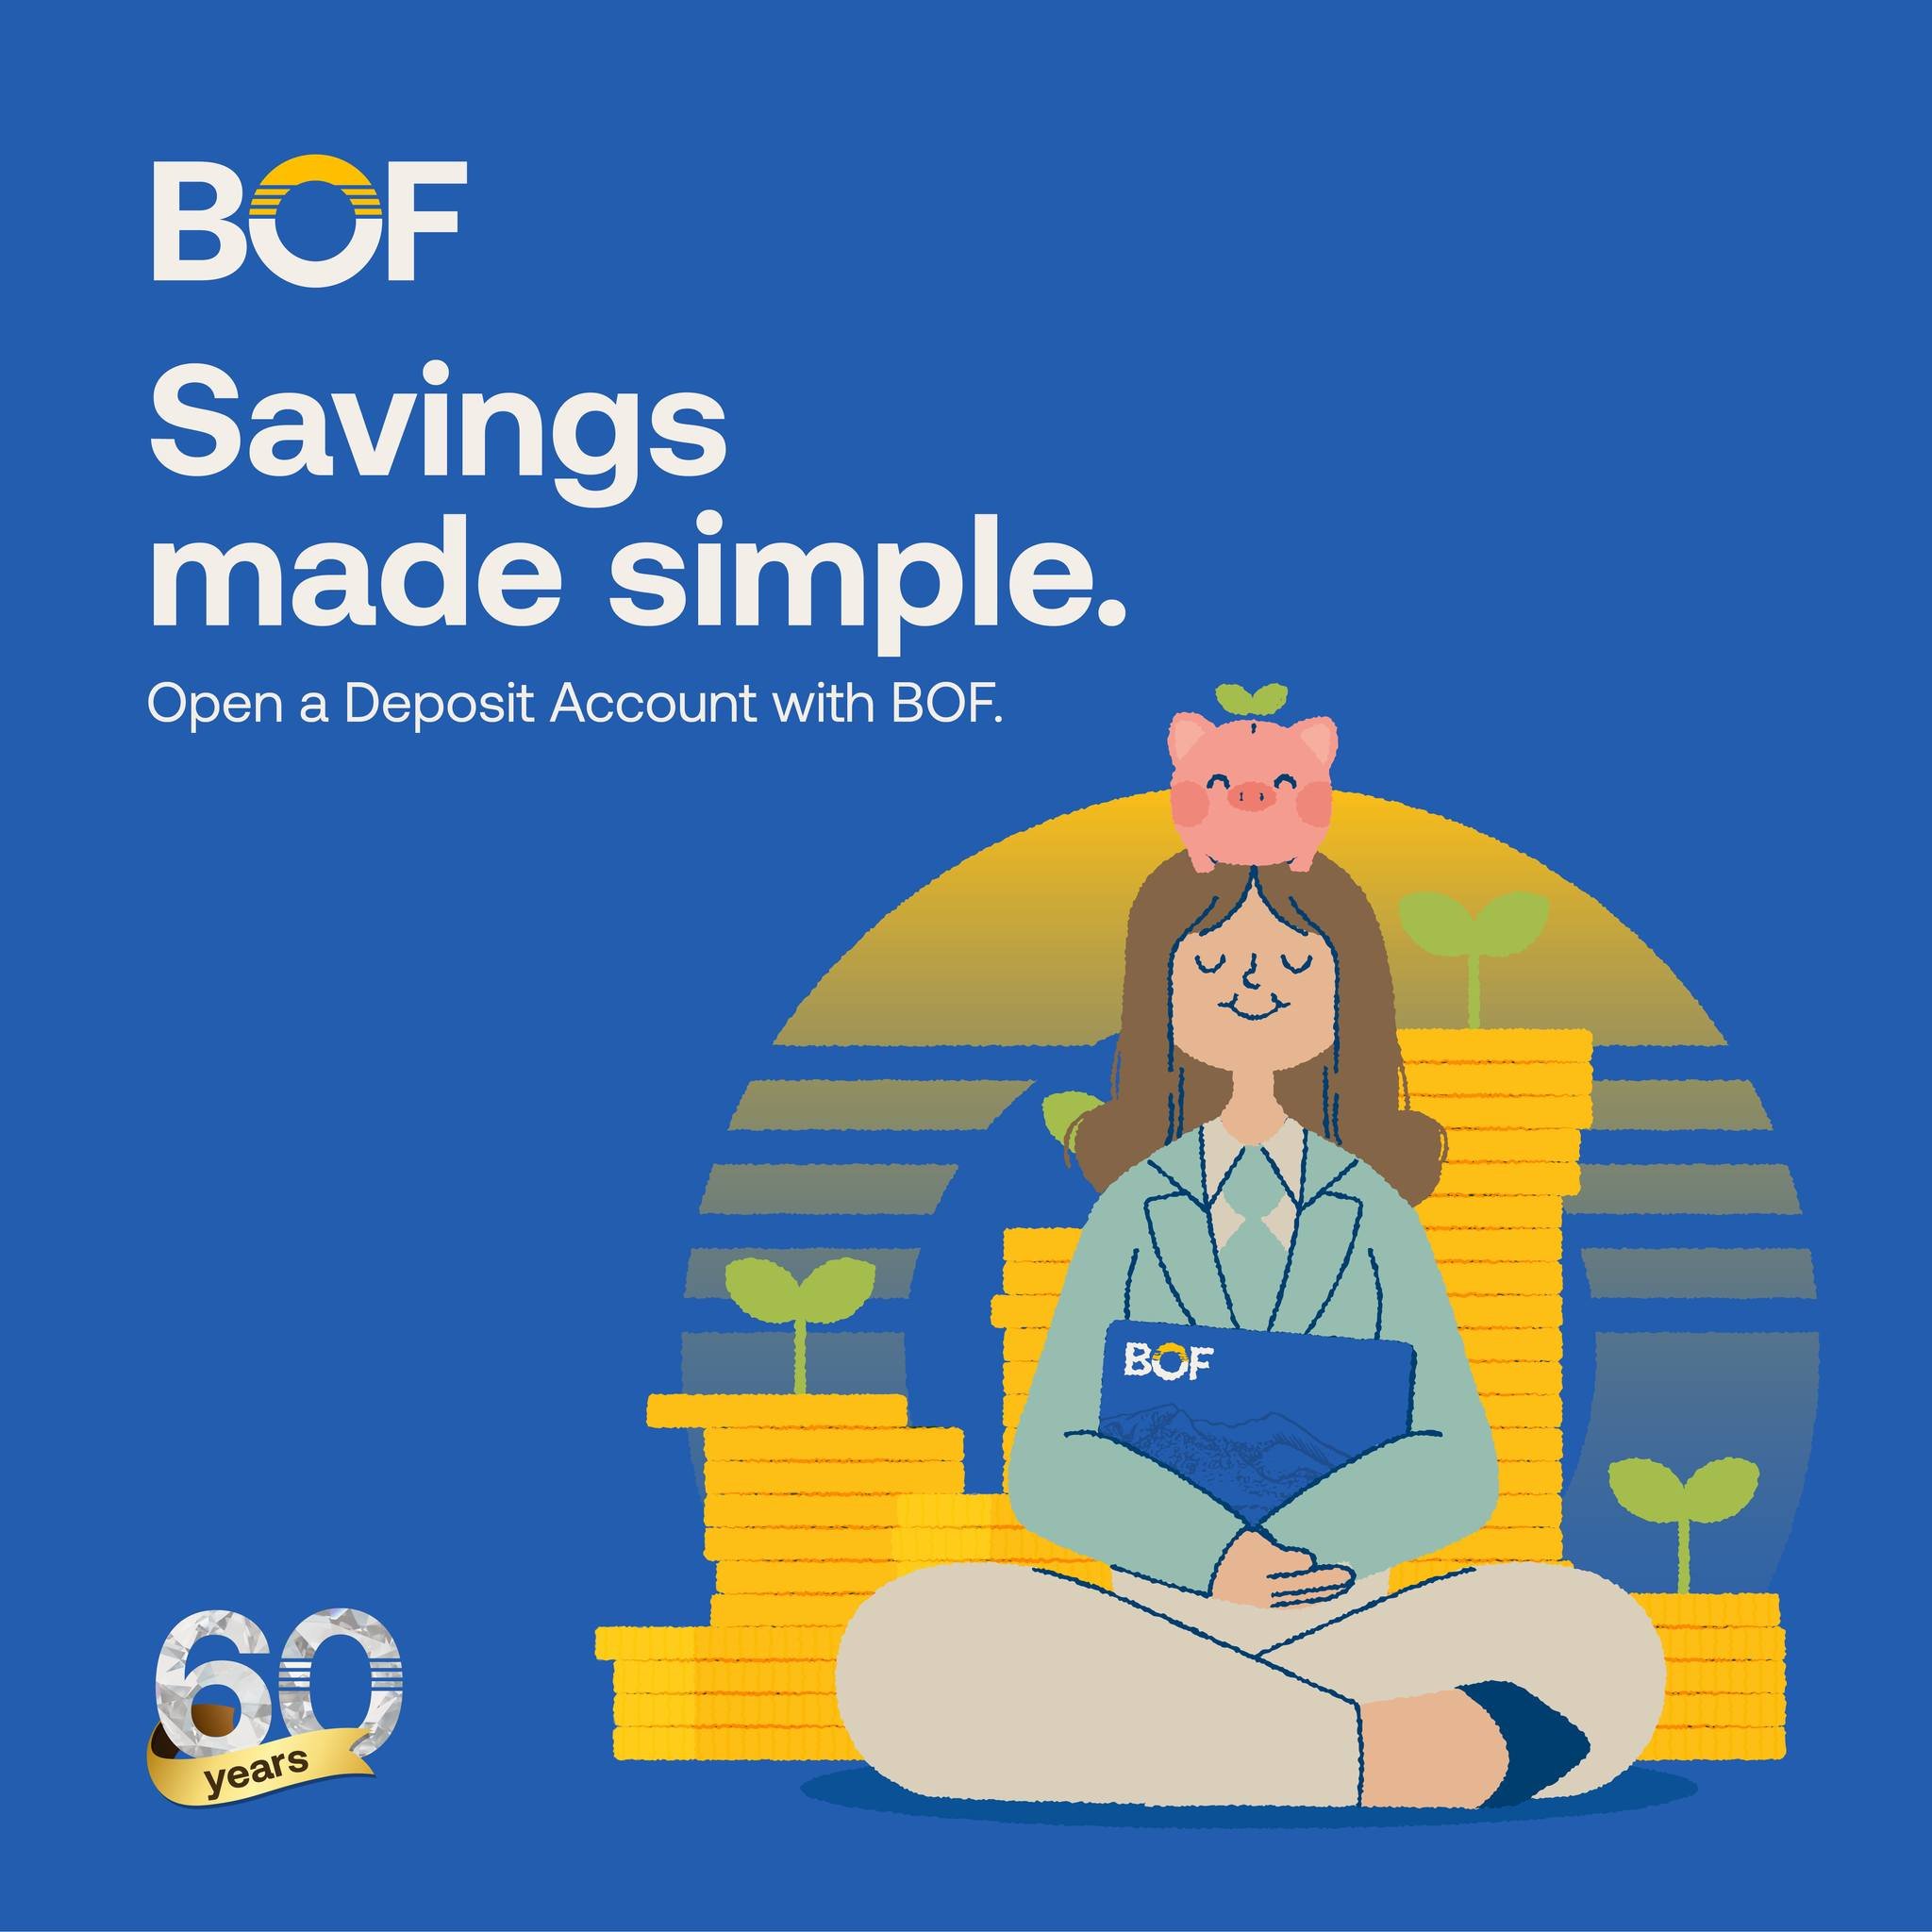 Keep it simple, save with ease!  Ready to start your savings journey? Open a Deposit Account with BOF today and take the first step towards your financial goals.

Visit our website to know more!
https://www.bof.com.ph/passbook-accounts

#BOF

BOF, In